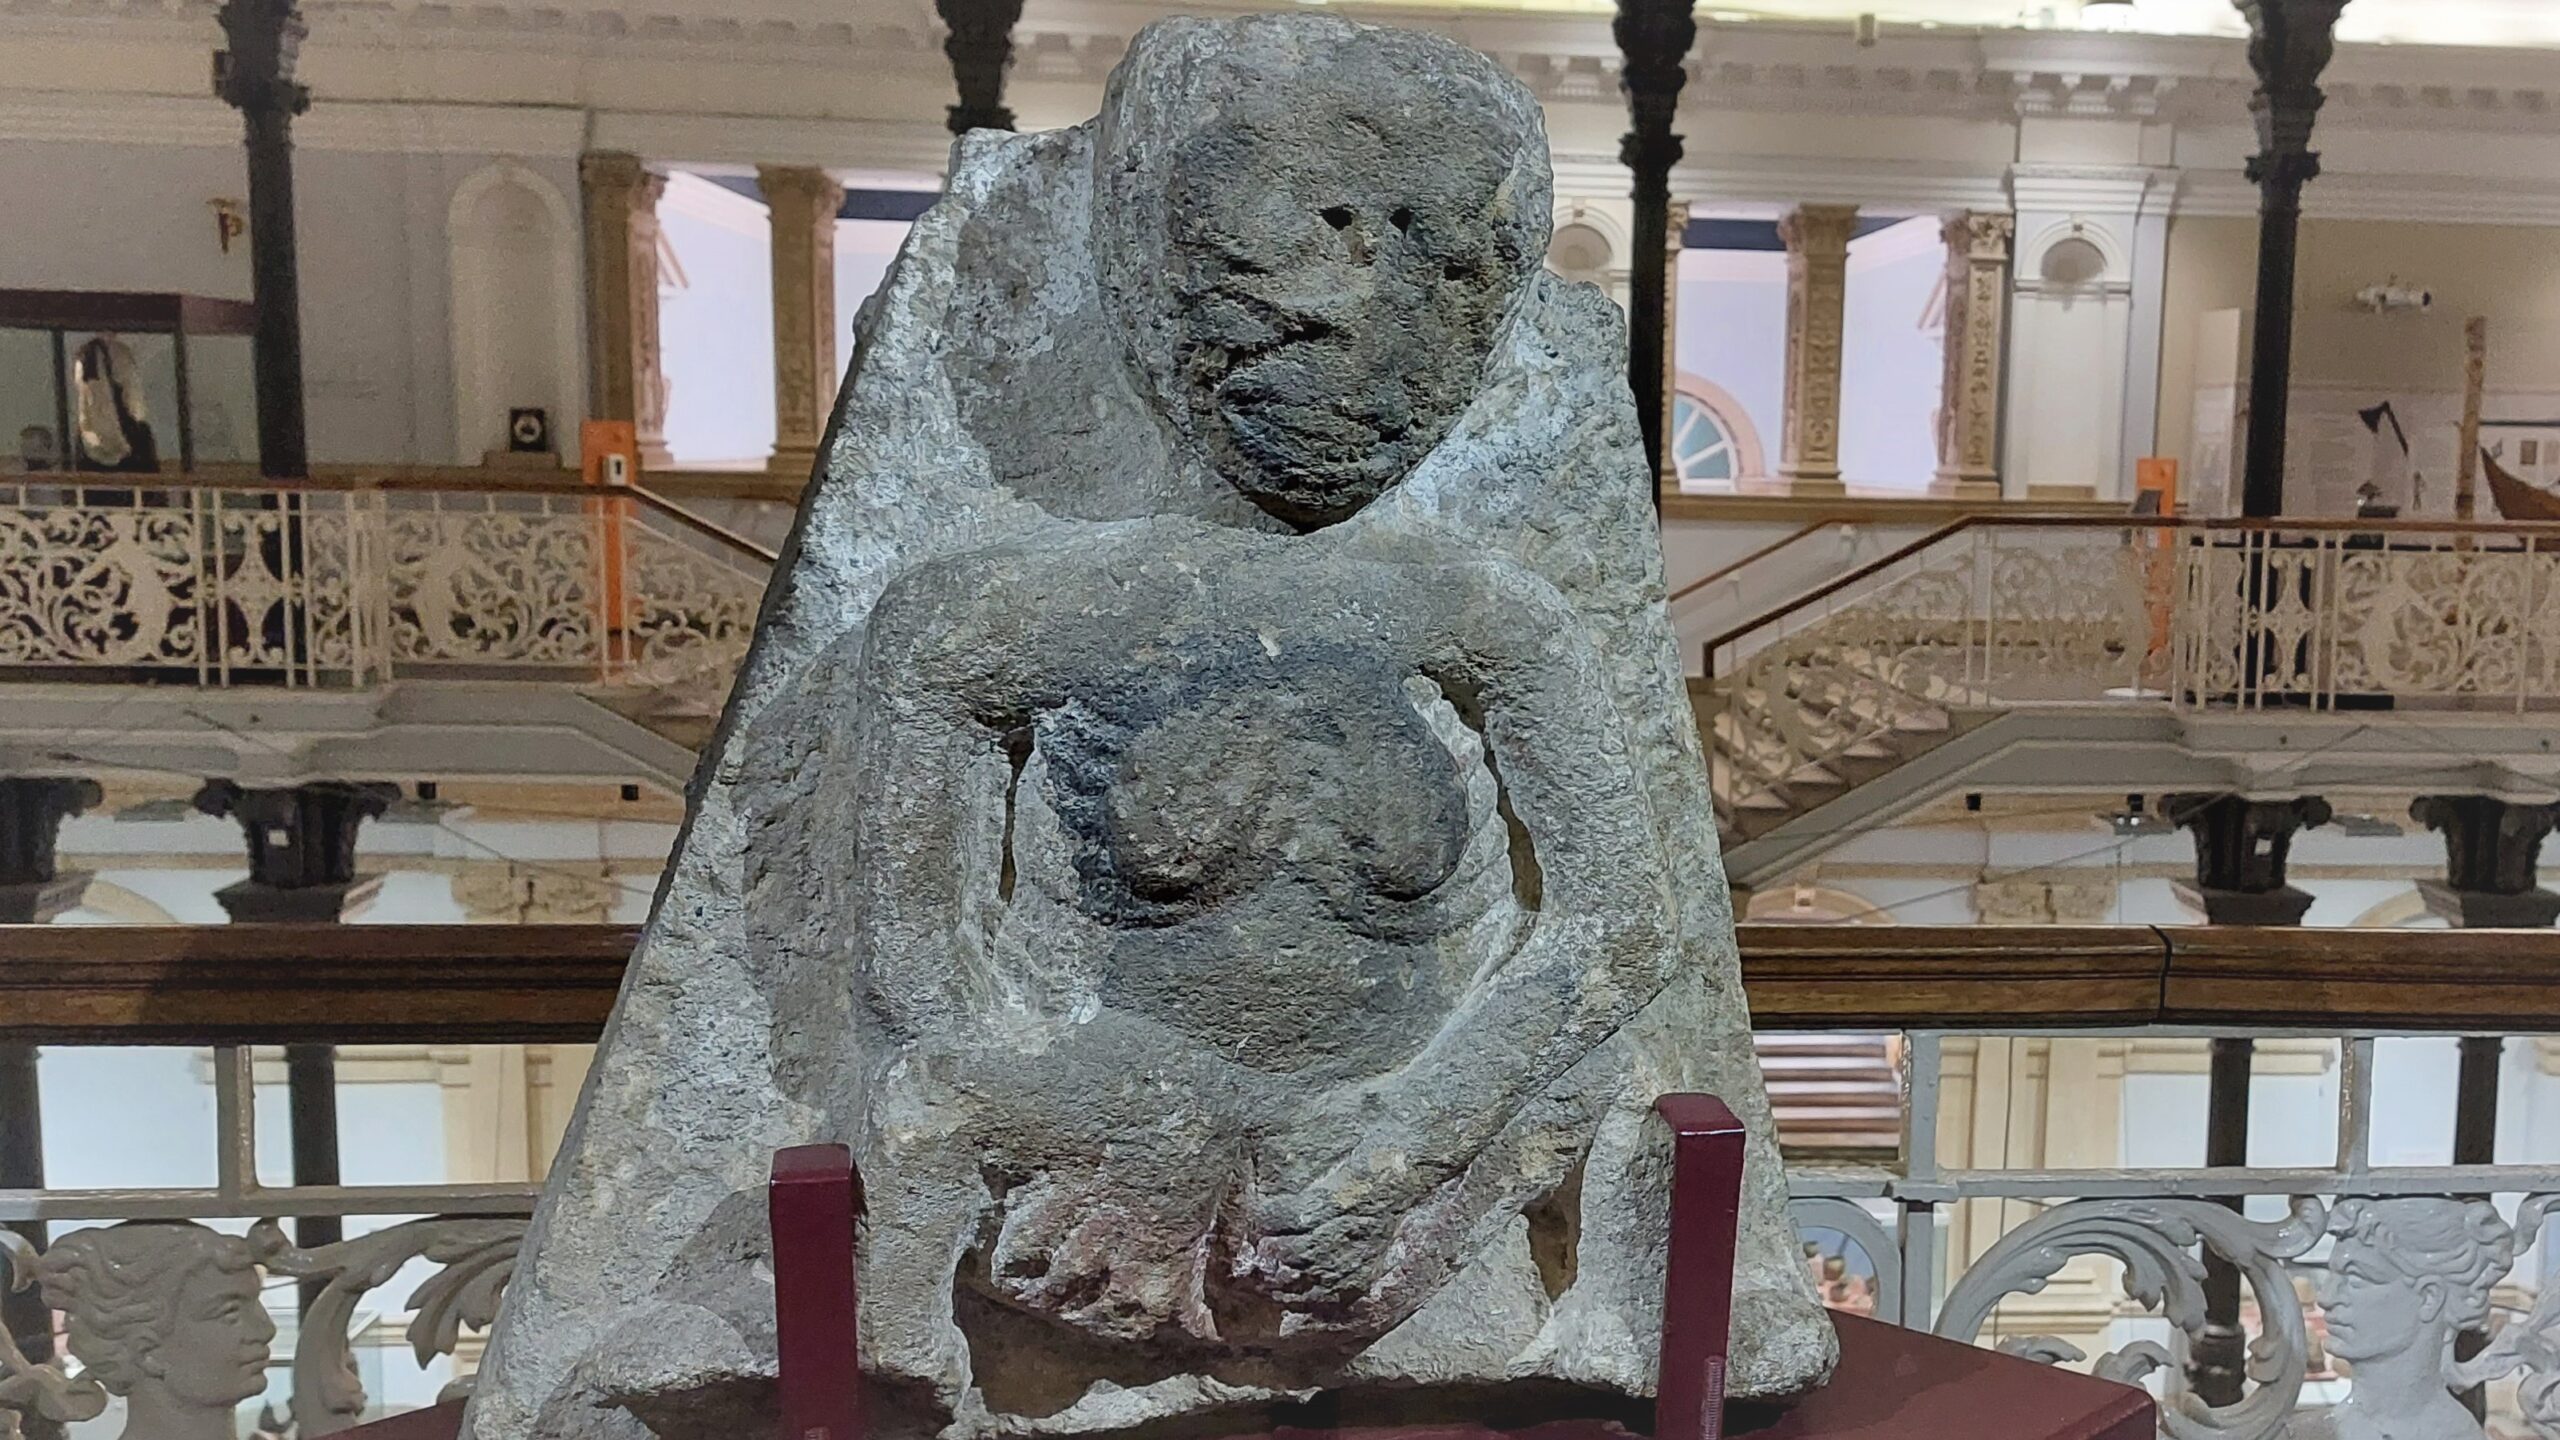 The Clonmel Sheela na Gog on display in the National Museum. The gallery and railings can be seen in the background